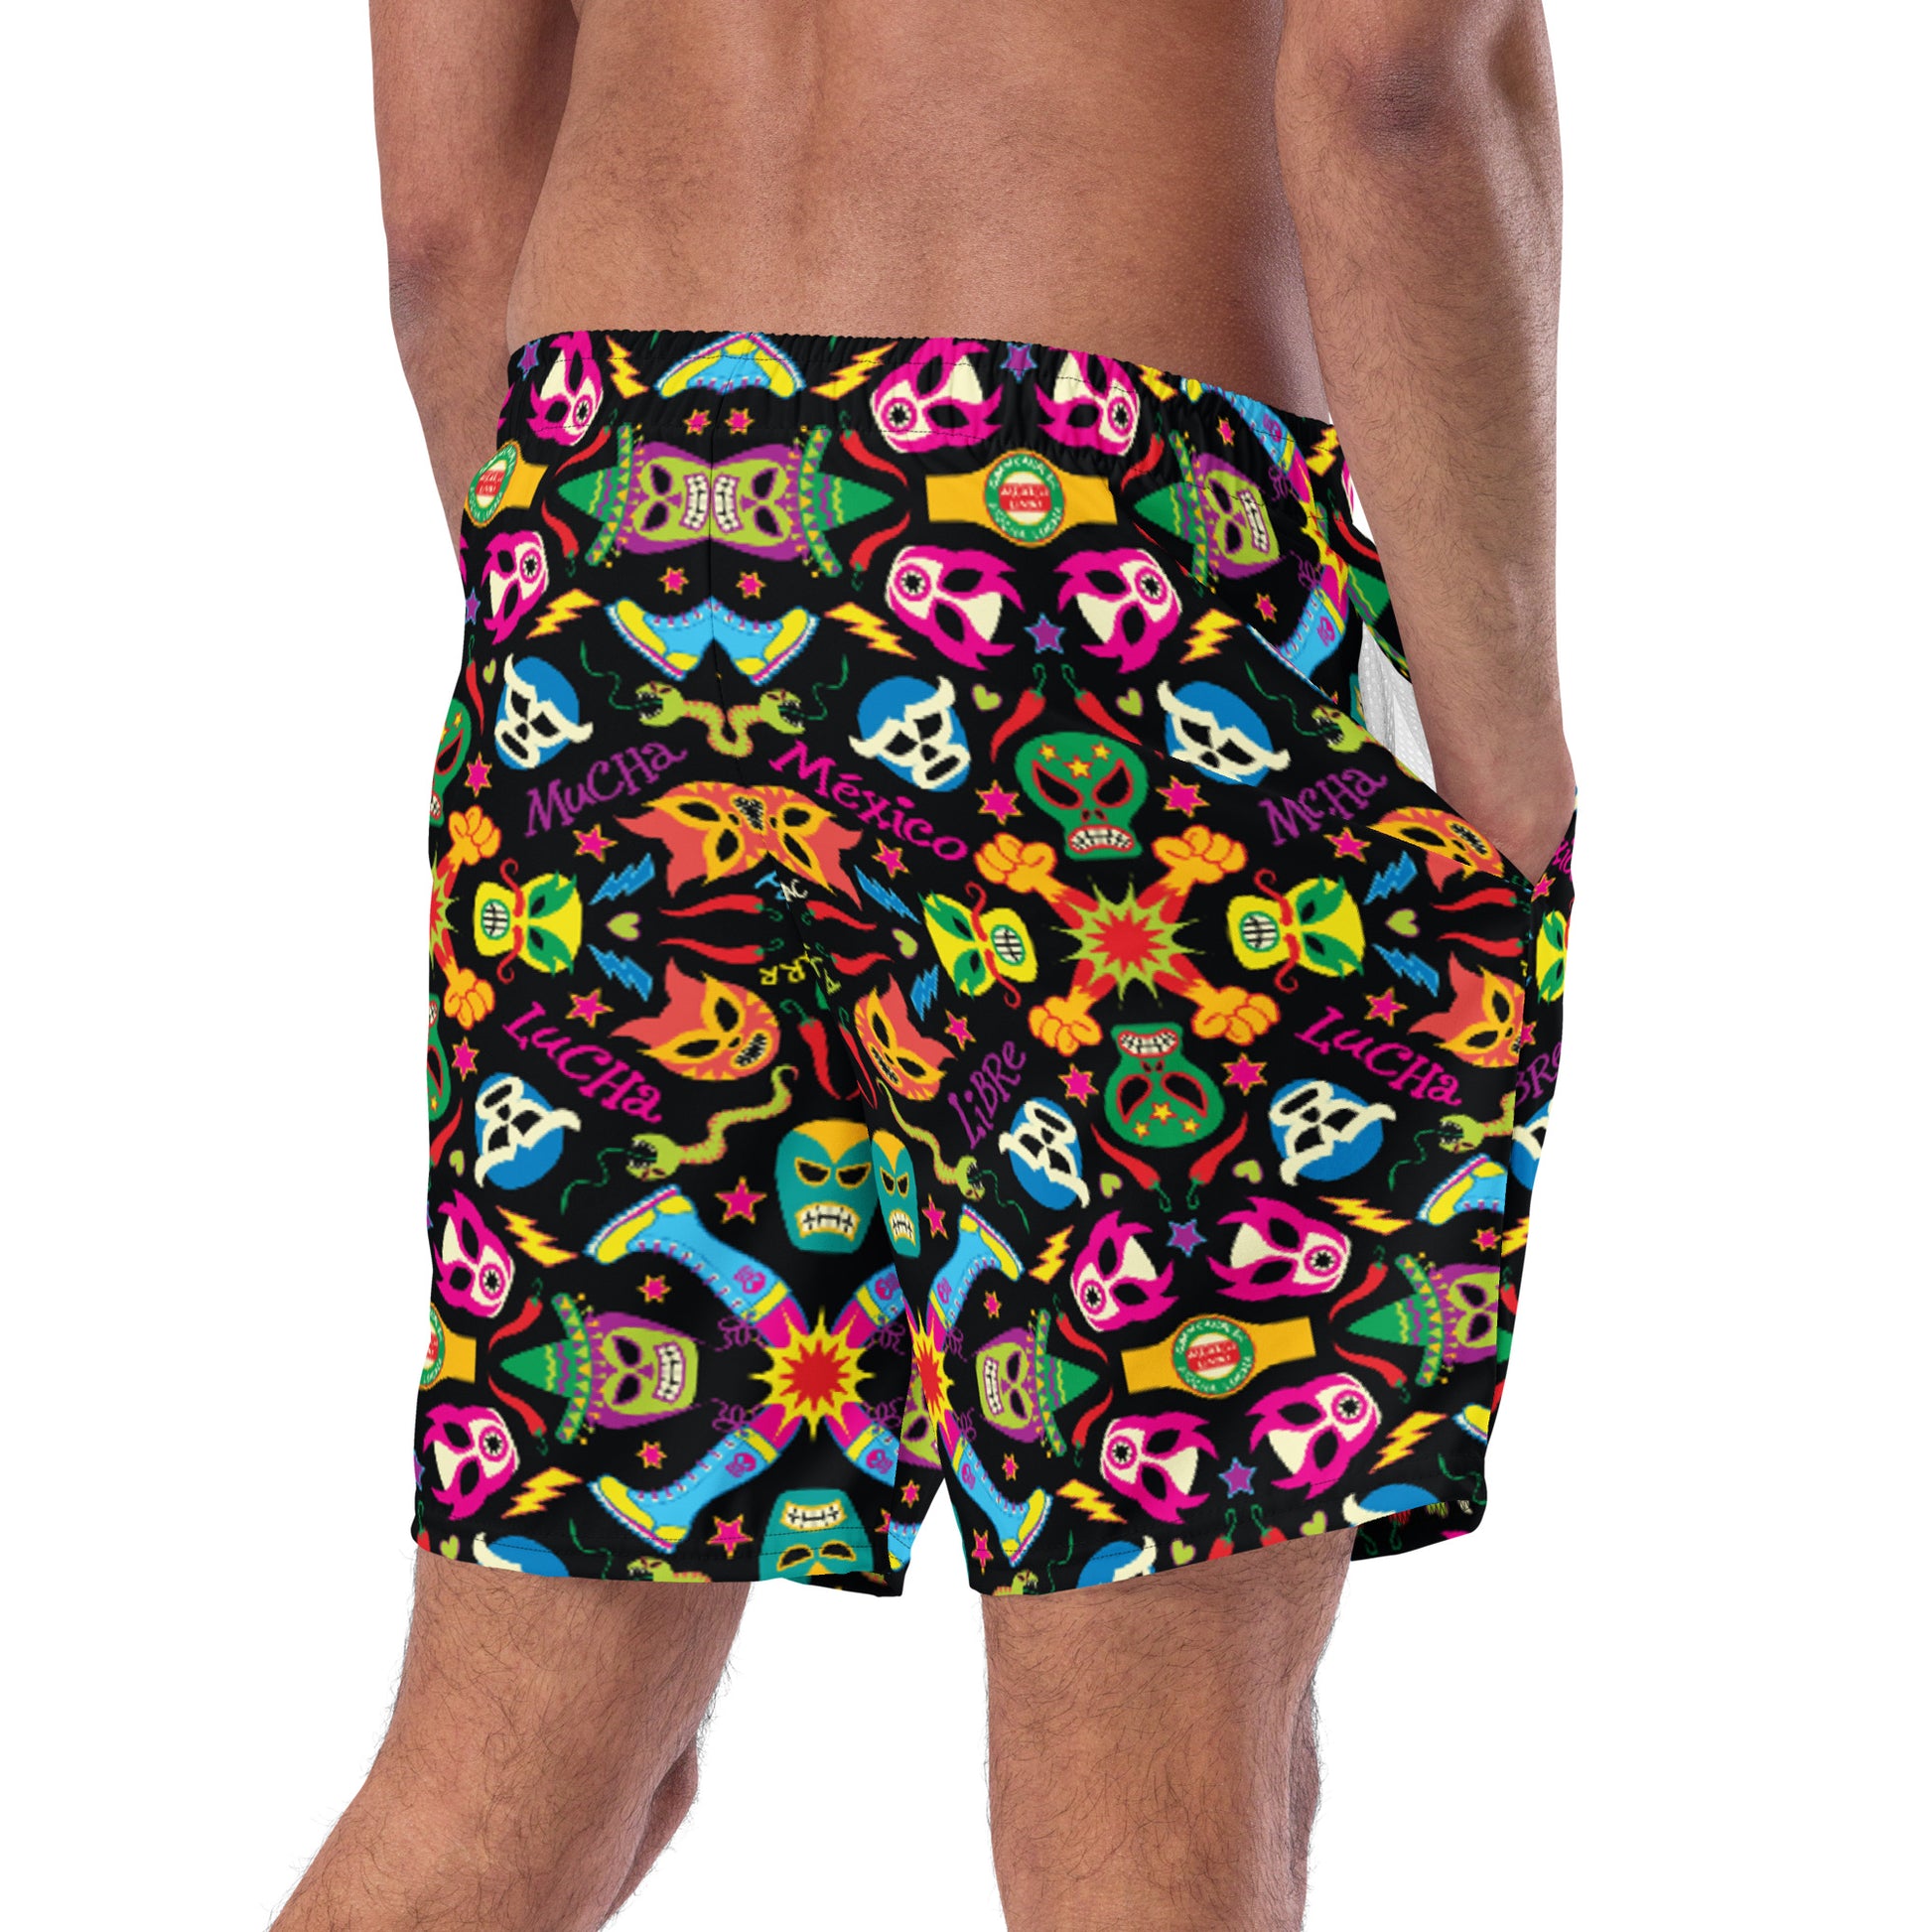 Mexican wrestling colorful party Men's swim trunks. Right back view